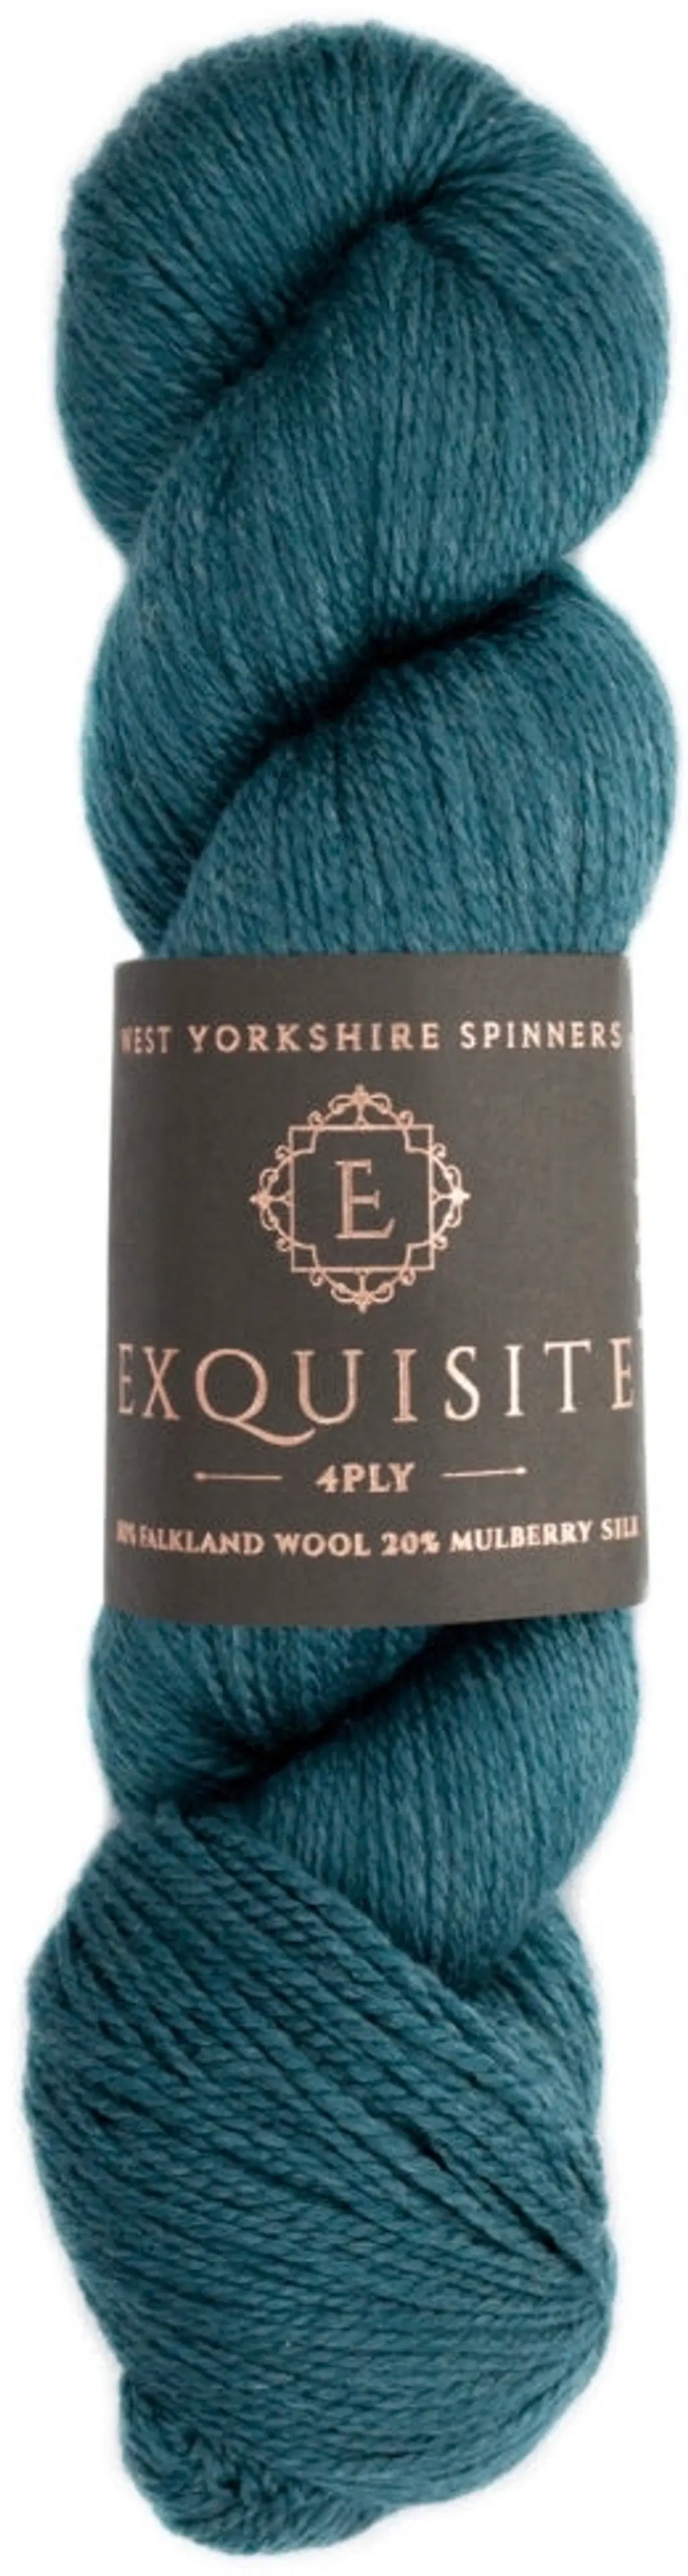 West Yorkshire Spinners lanka Exquisite 4PLY 100g Bayswater 318